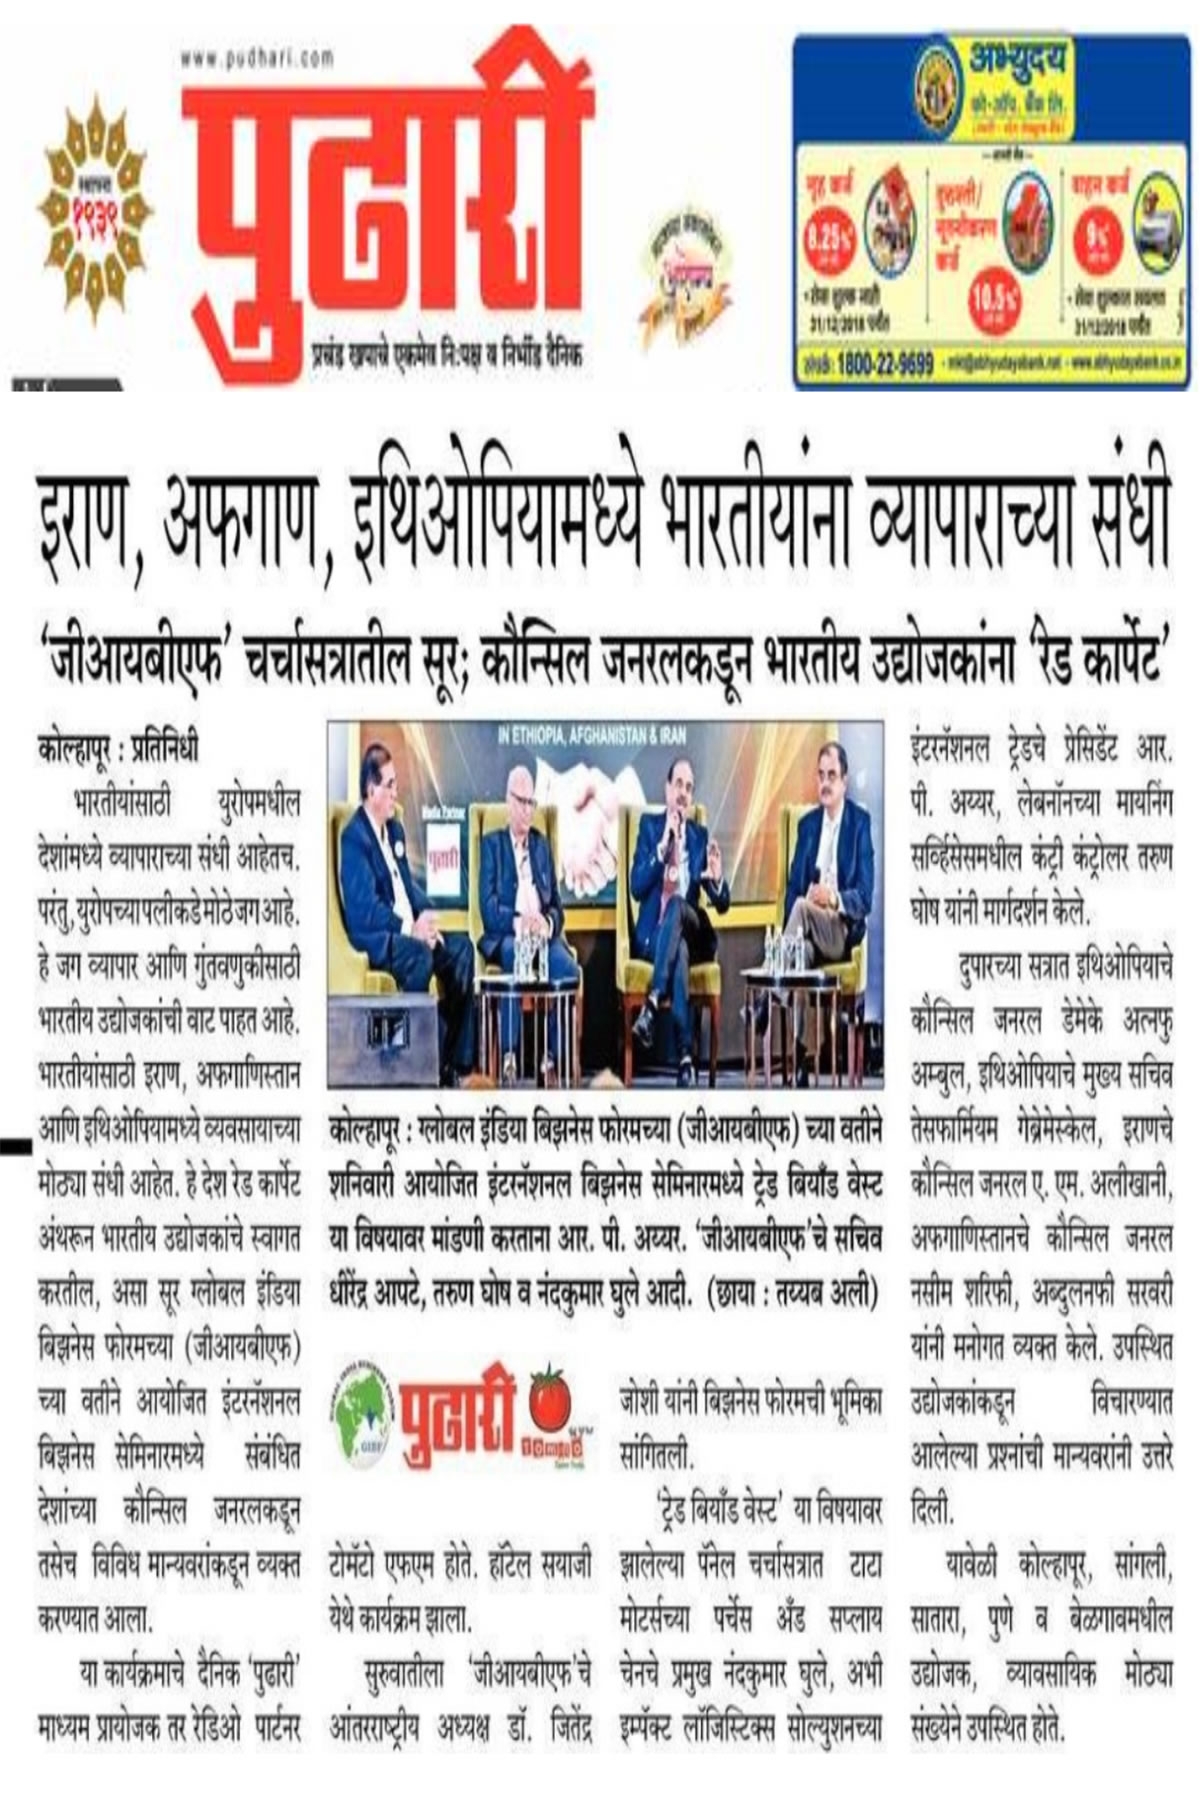 gibf-printed-media-gibf-is-the-best-platform-to-provide-global-market-and-business-opportunities-for-indians-in-iran-3-august-2019